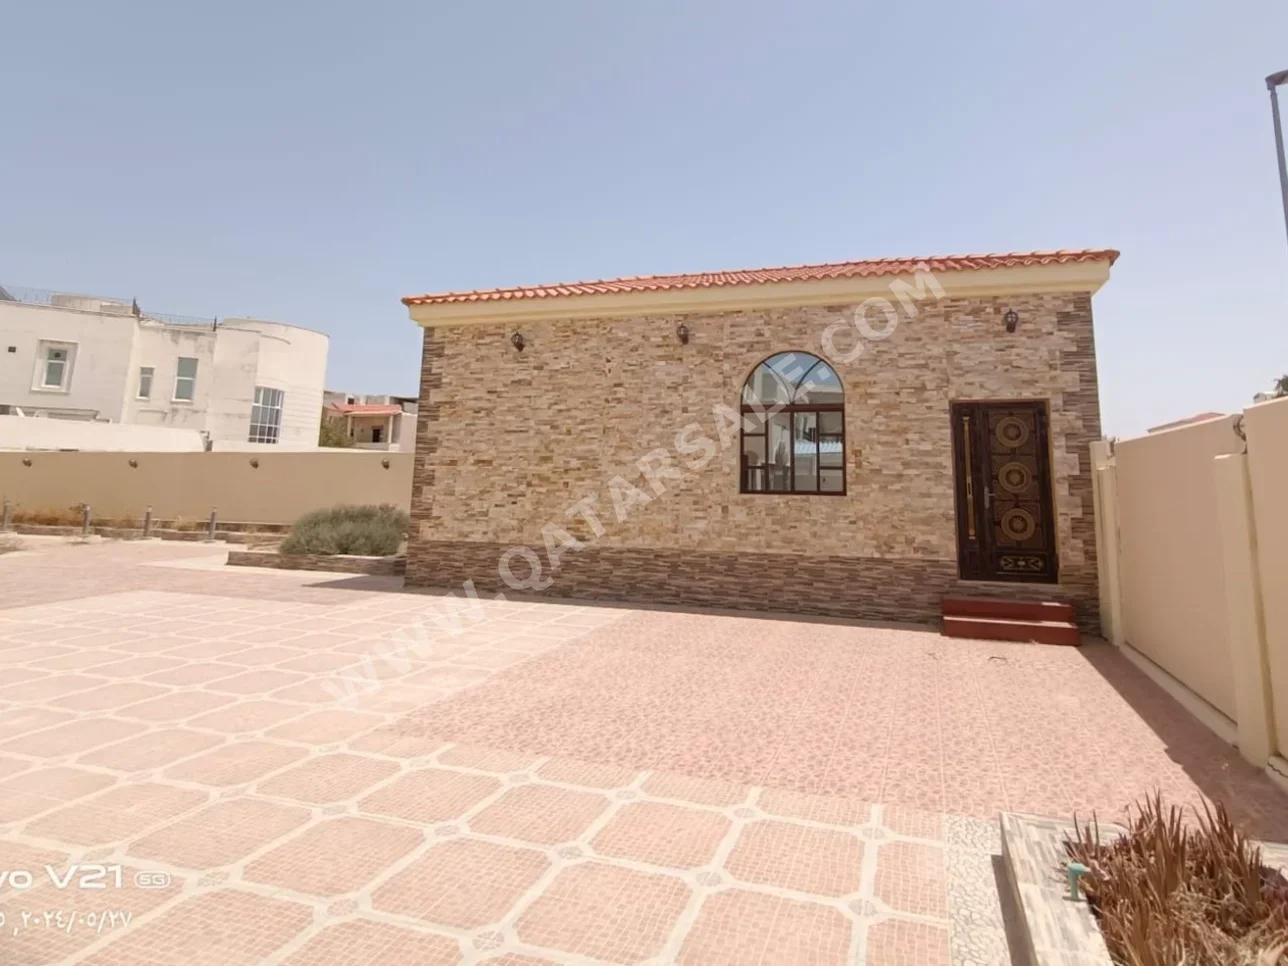 Family Residential  - Not Furnished  - Doha  - Al Dafna  - 5 Bedrooms